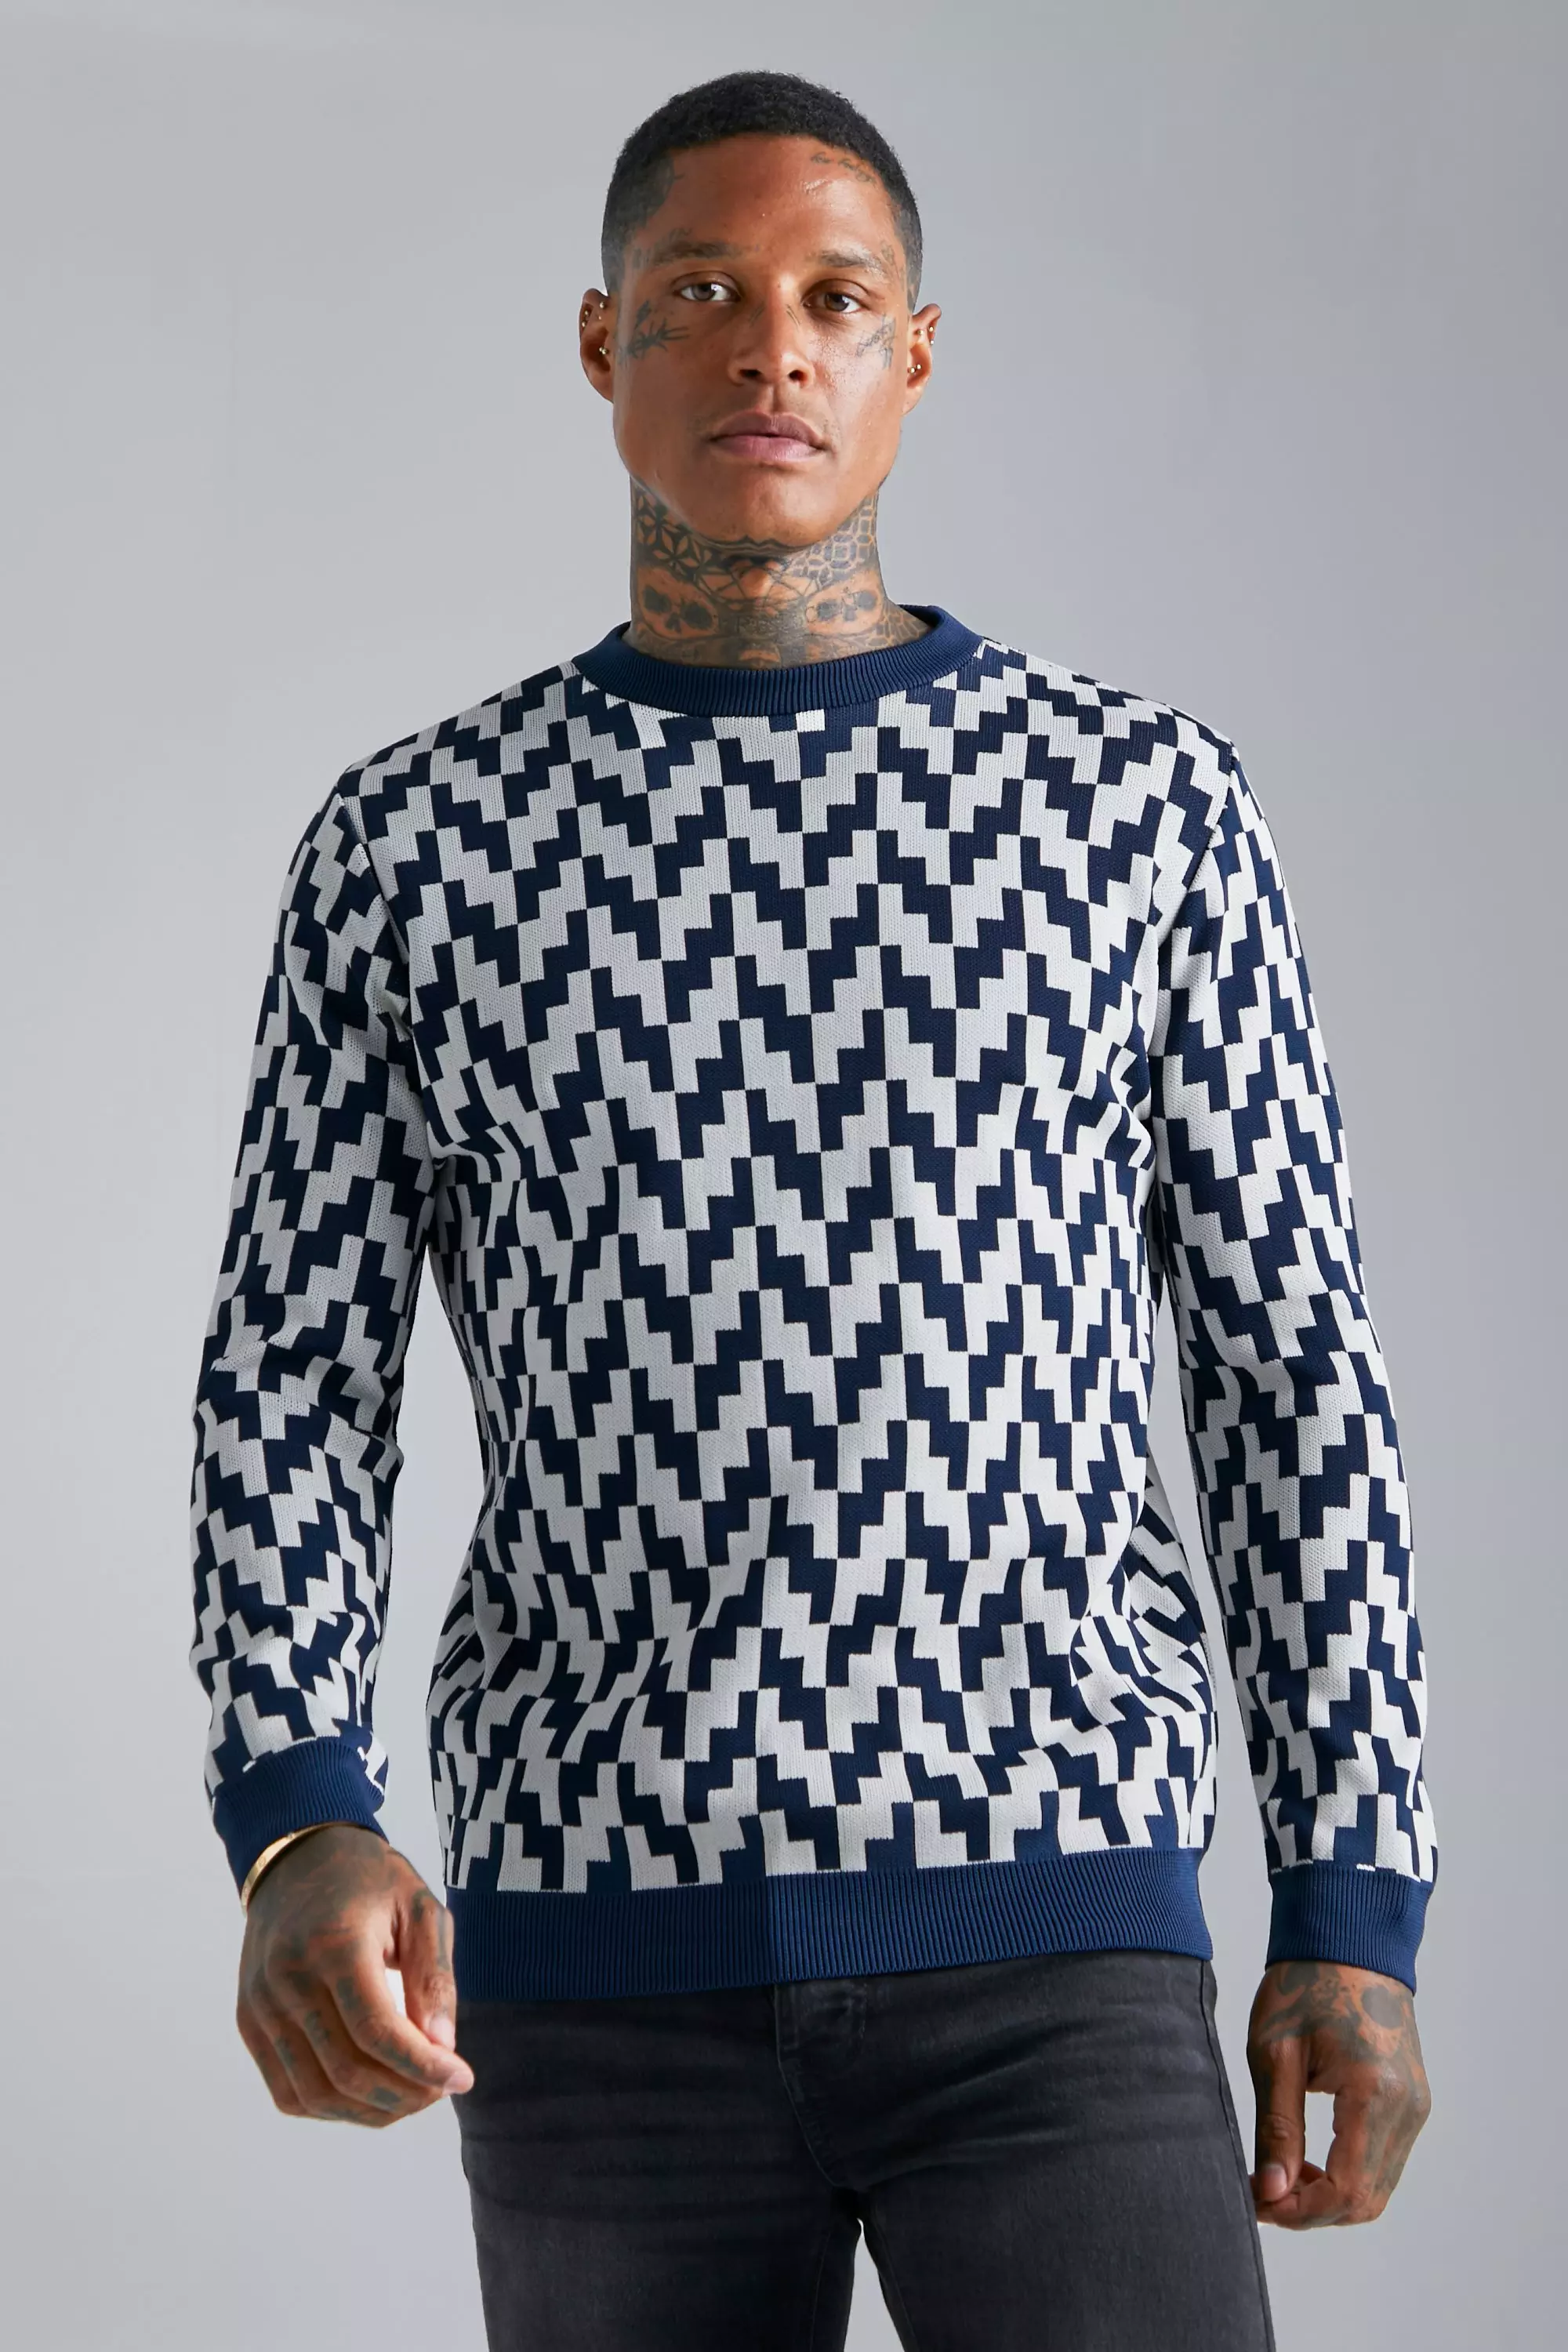 Geo Square Smart Knitted Sweater Navy